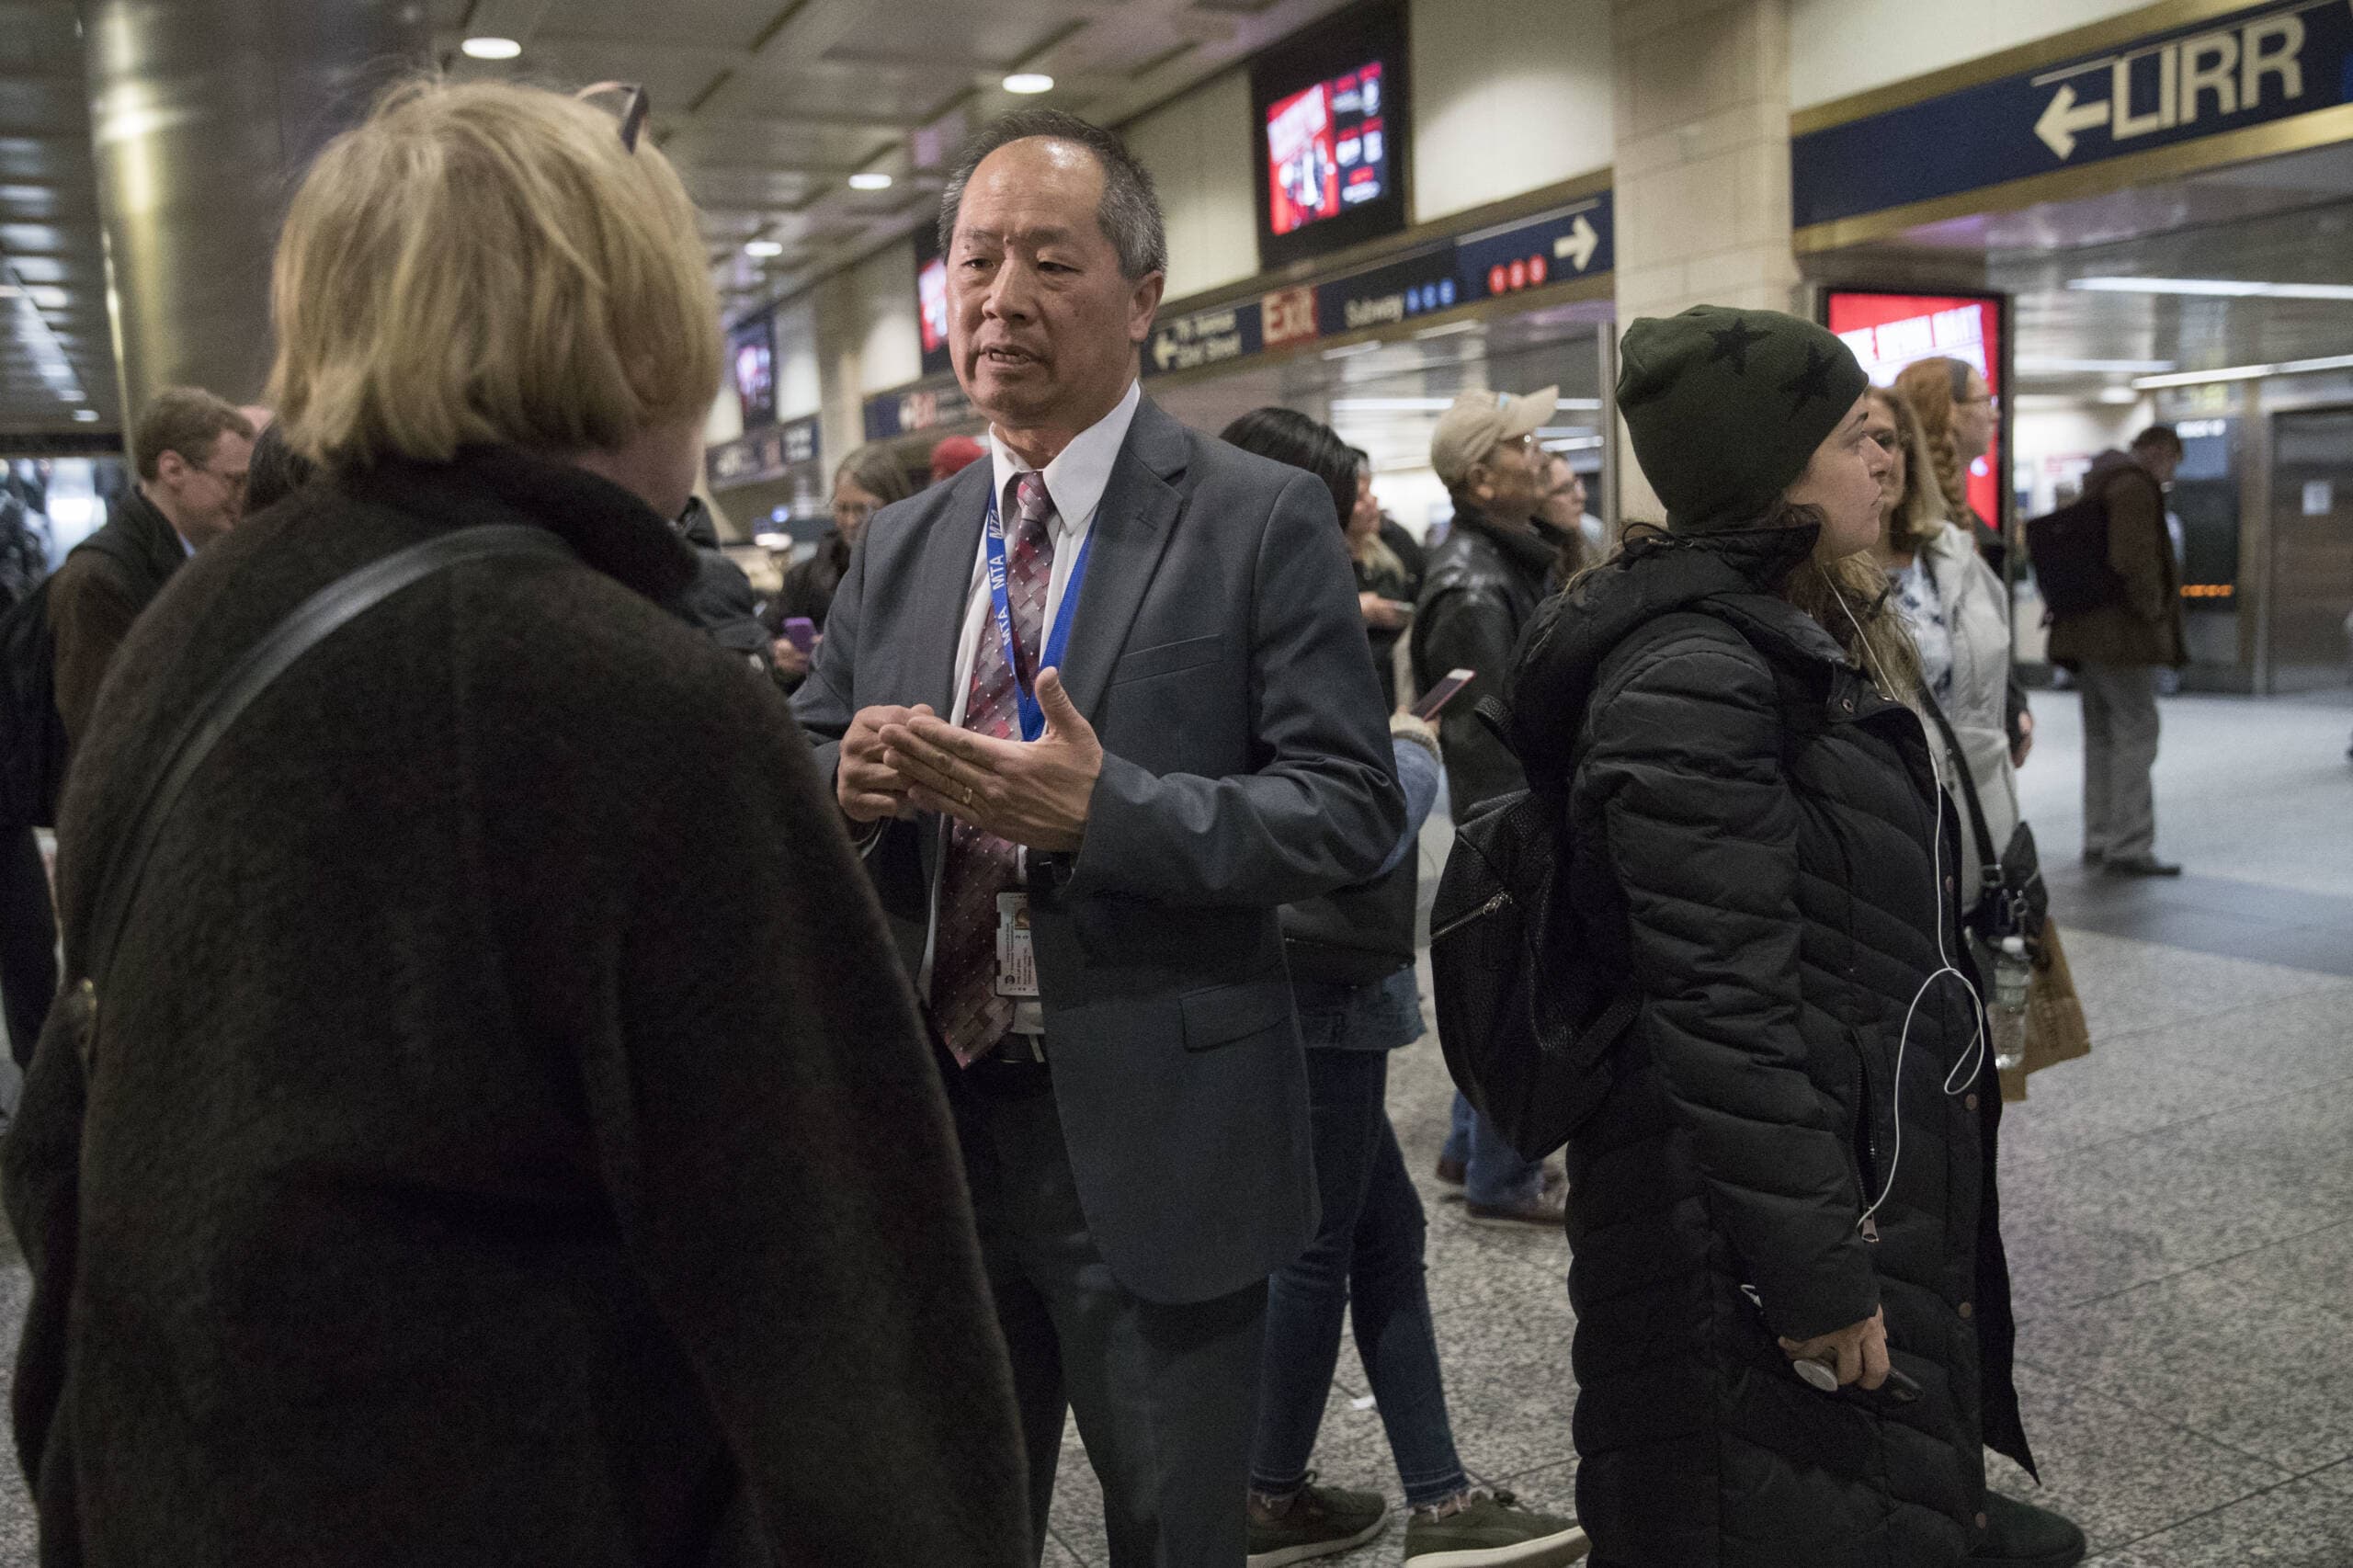 MBTA General Manager Phil Eng, center, talks to evening rush hour commuters at Penn Station, April 17, 2018, in New York when he was the president of Long Island Rail Road. (Mary Altaffer/AP)